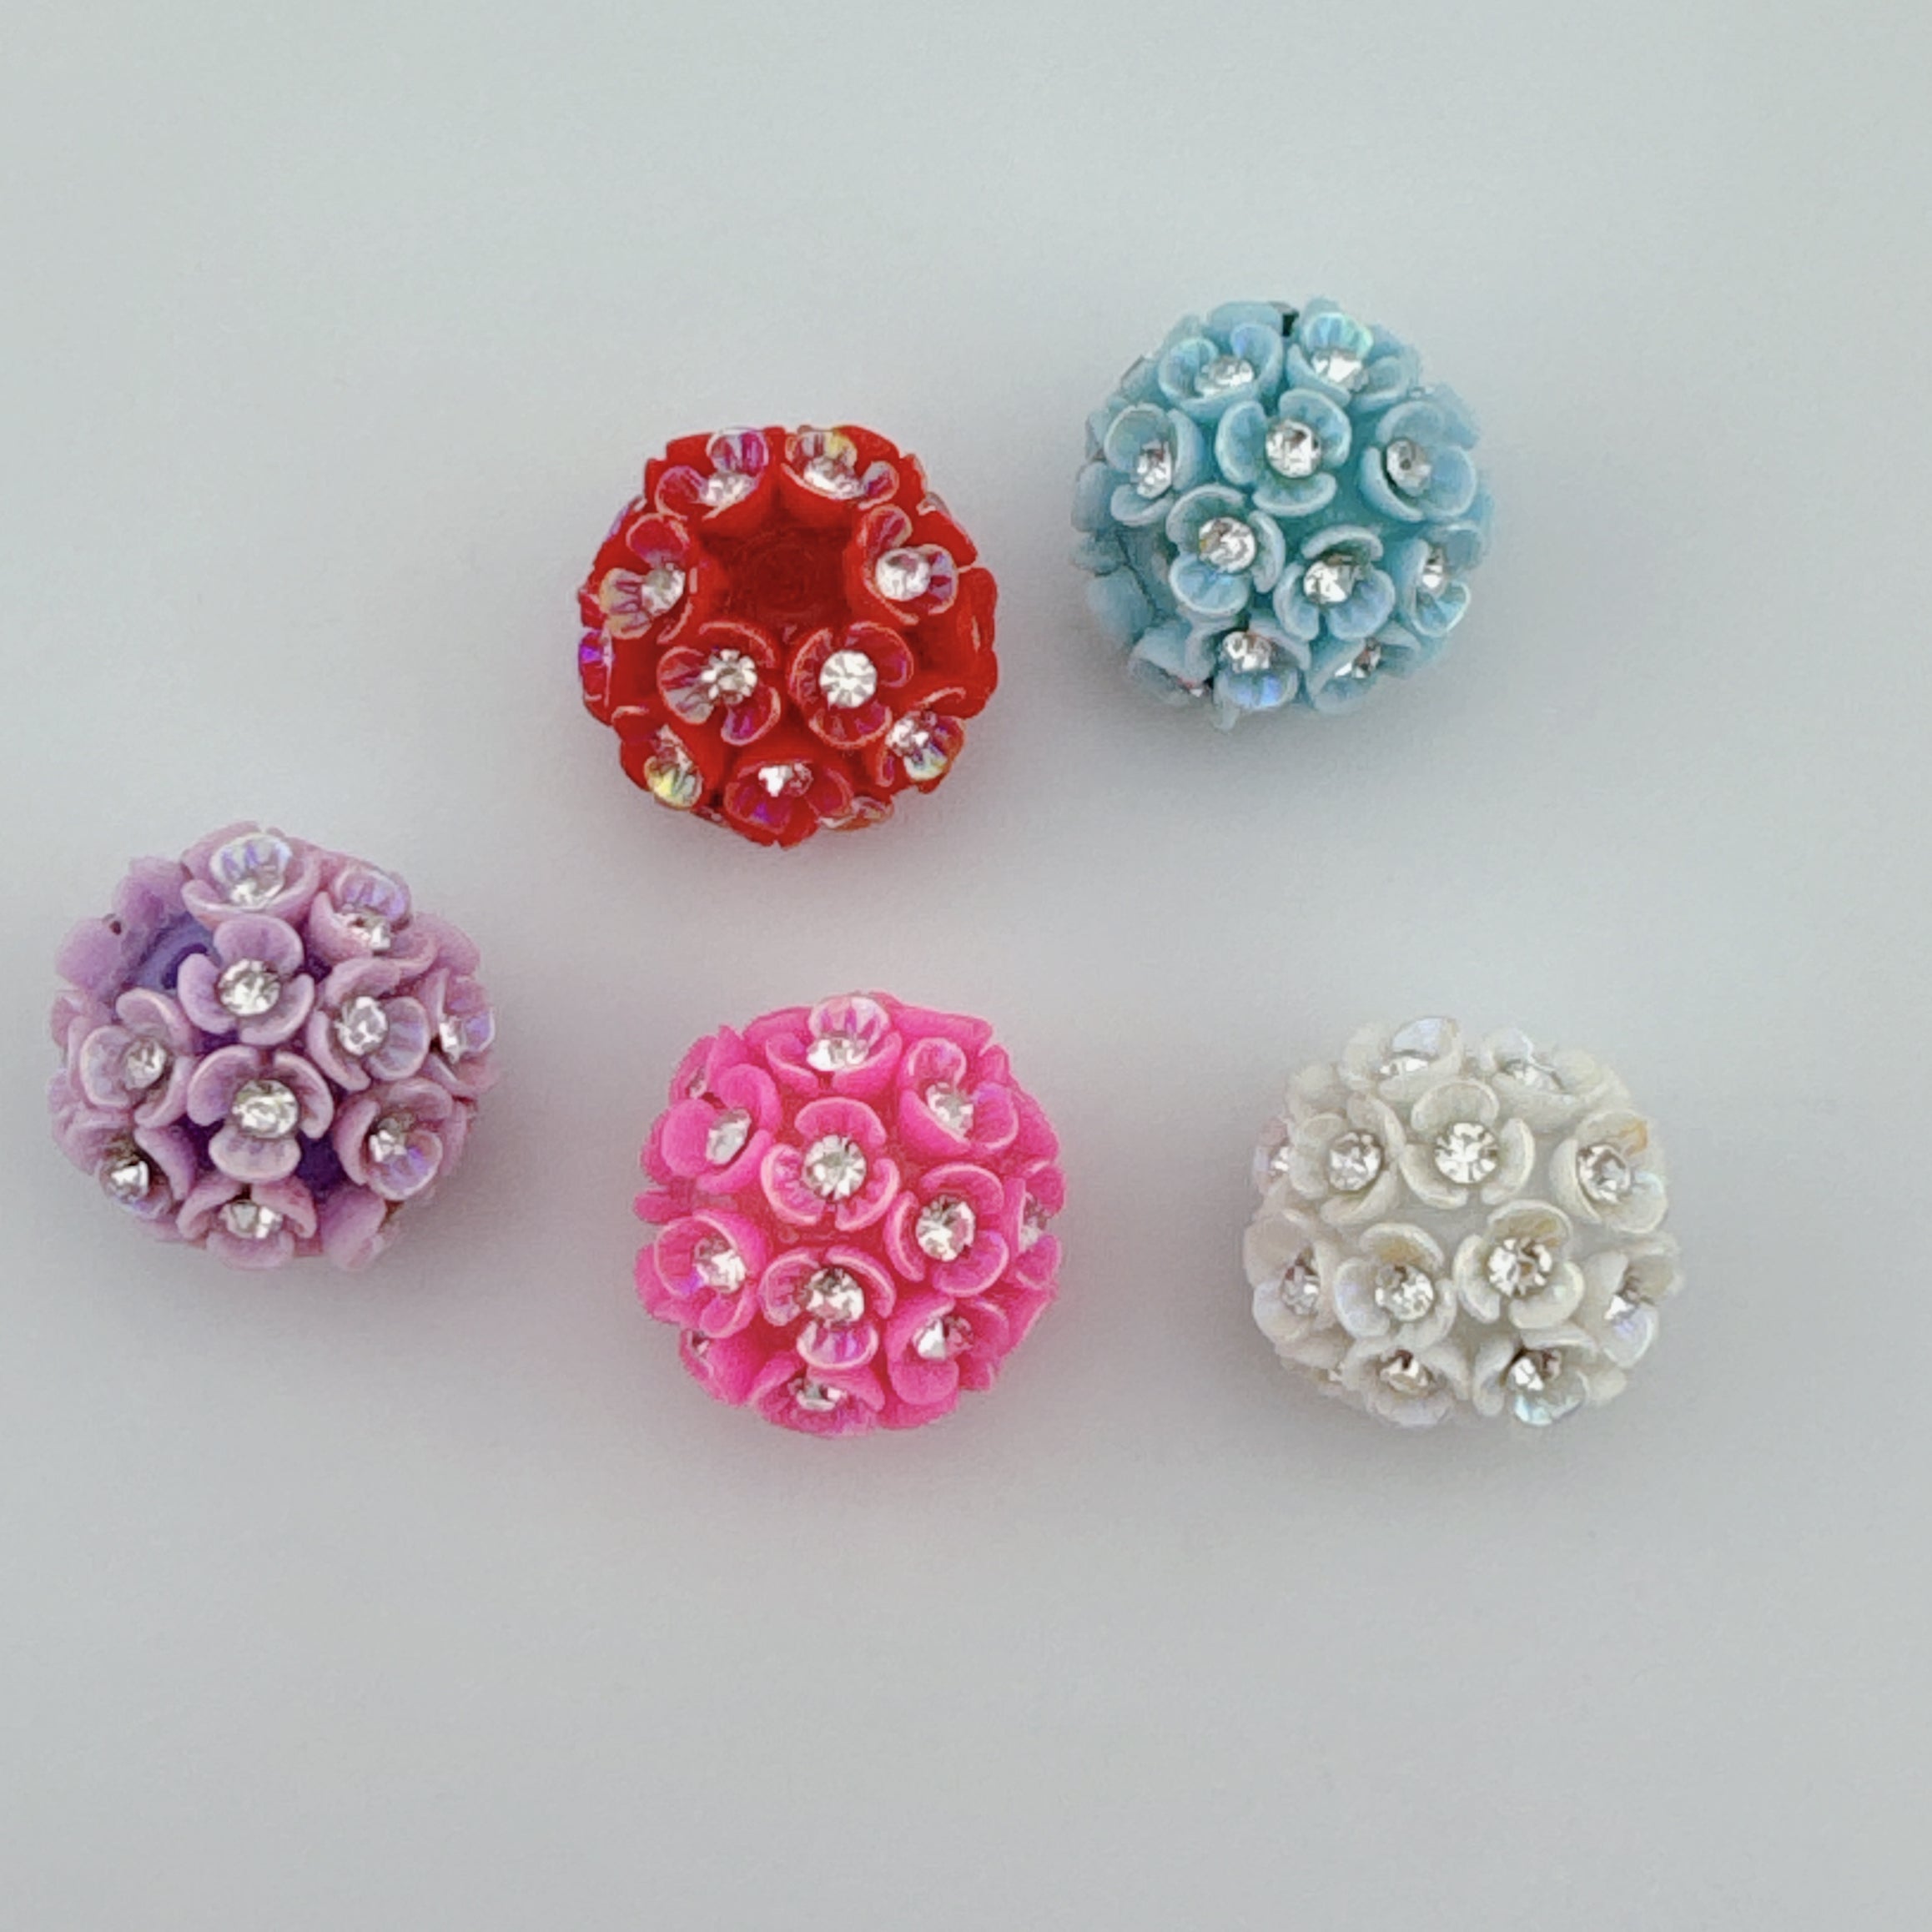 5 Pieces Flower Sparkling Beads